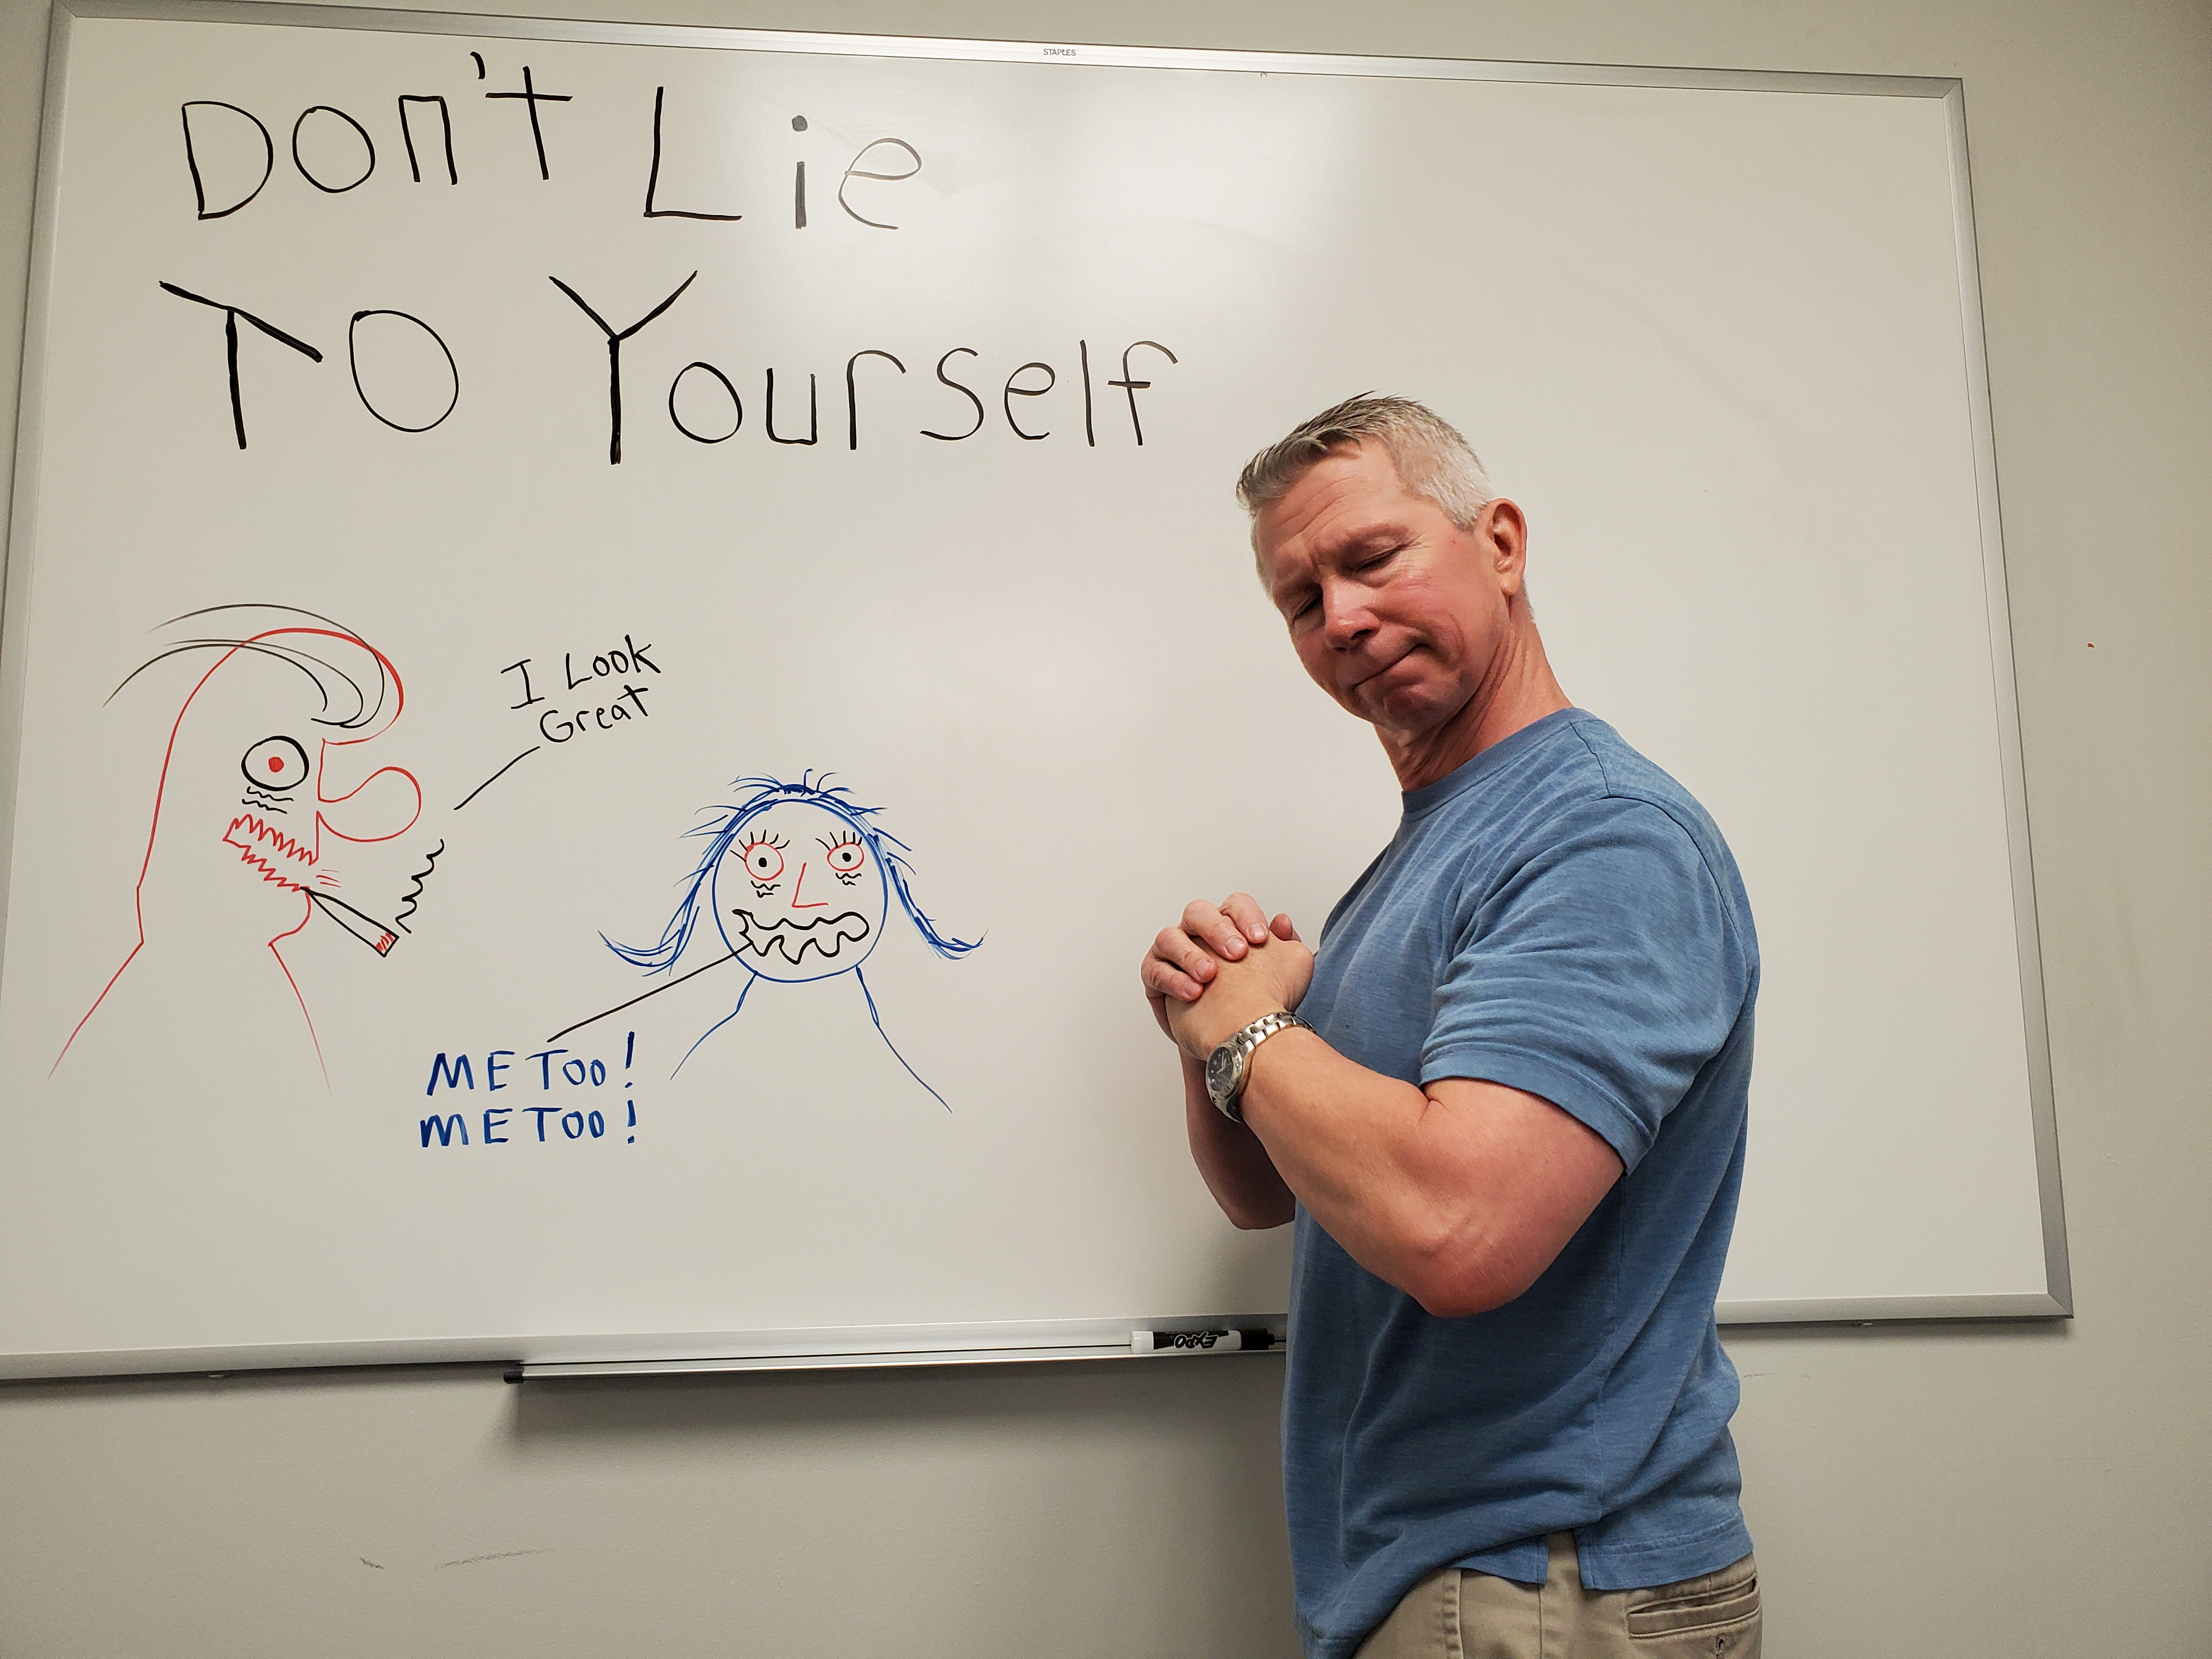 five truths at a time mark mellohusky don't lie to yourself